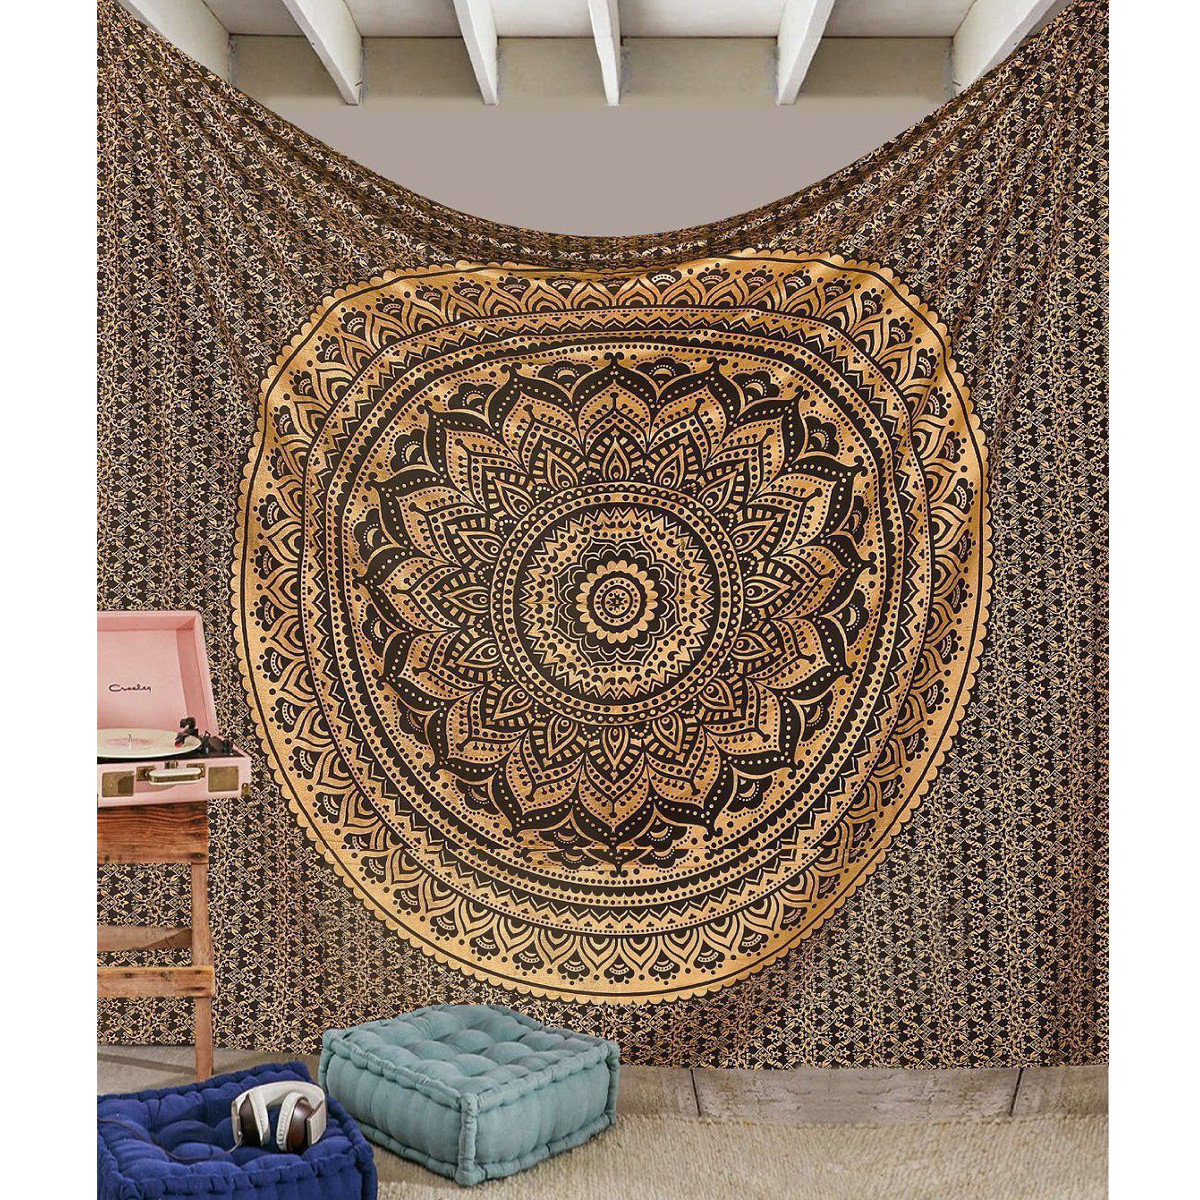 

145*145cm Indian Ombre Mandala Gold Tapestry Wall Hanging Blanket Art Throw Bedding Bedspread